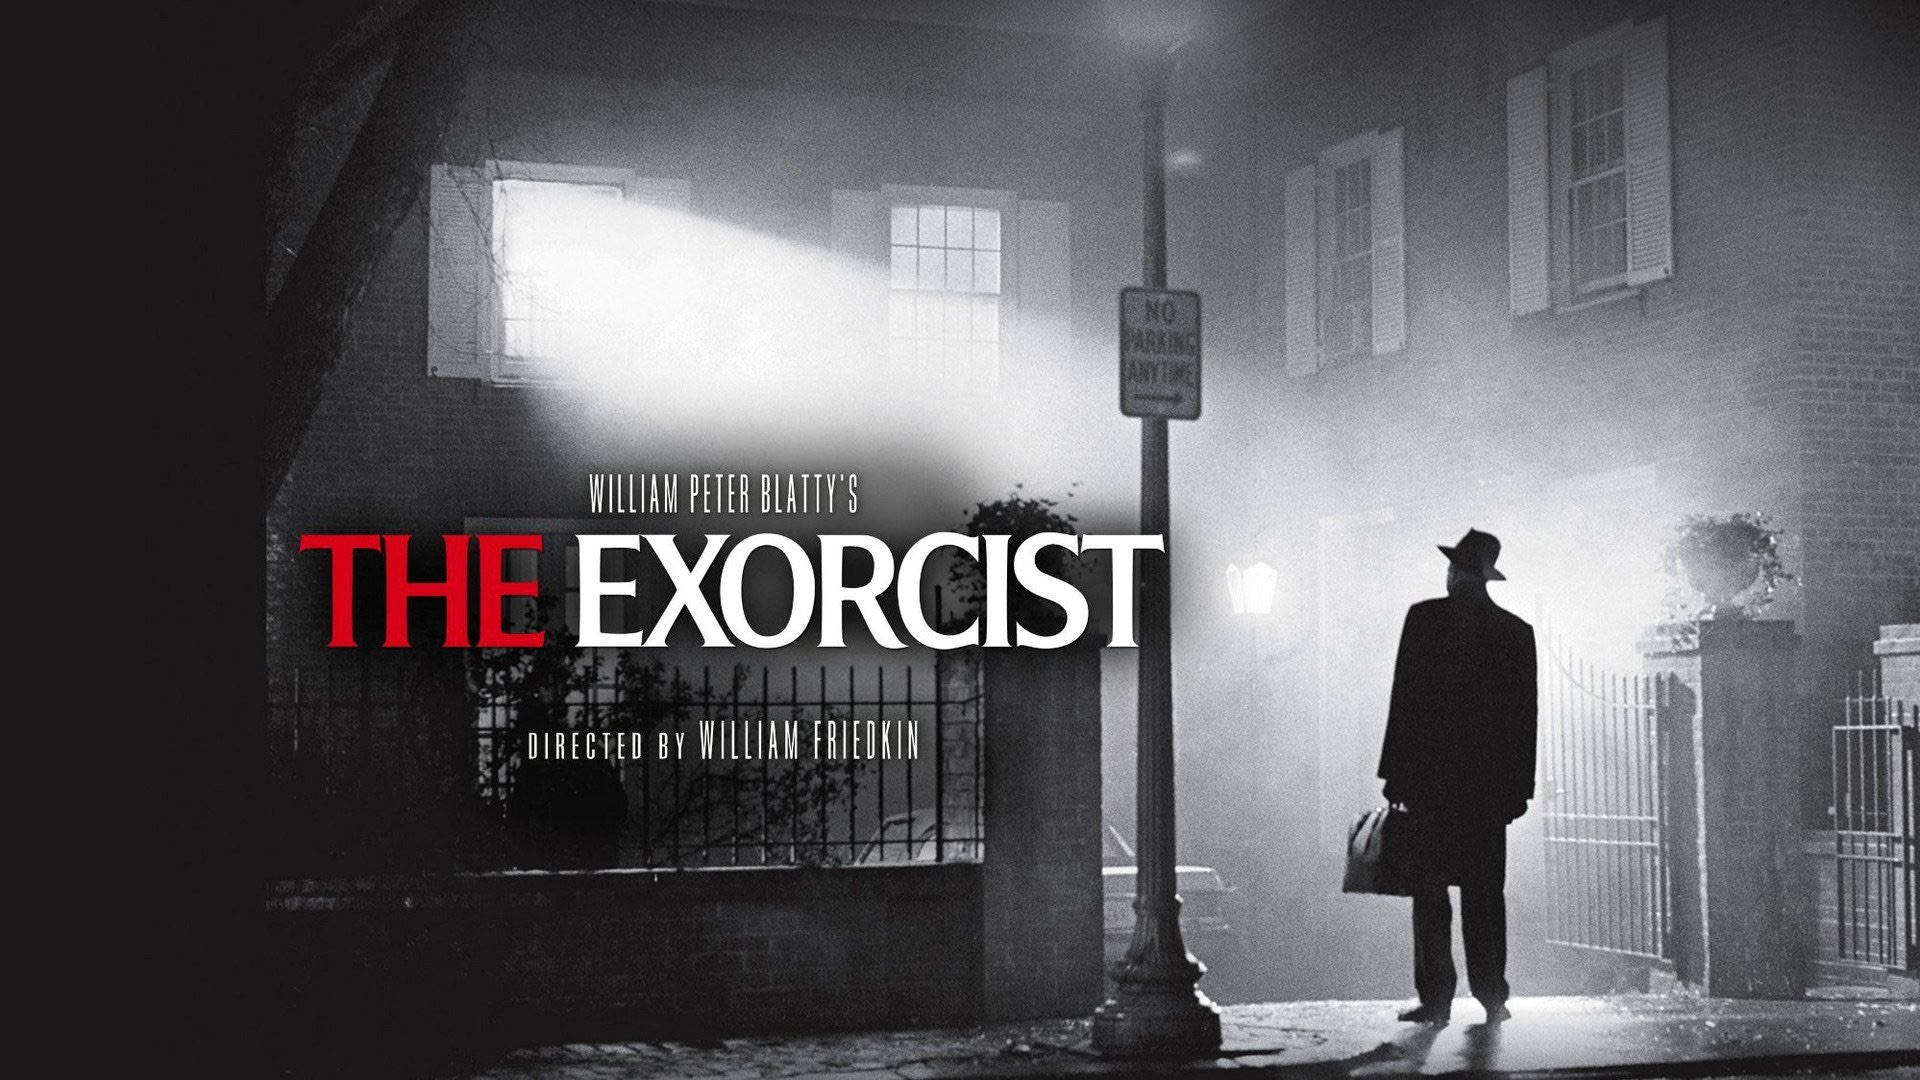 The Exorcist Film Poster Background